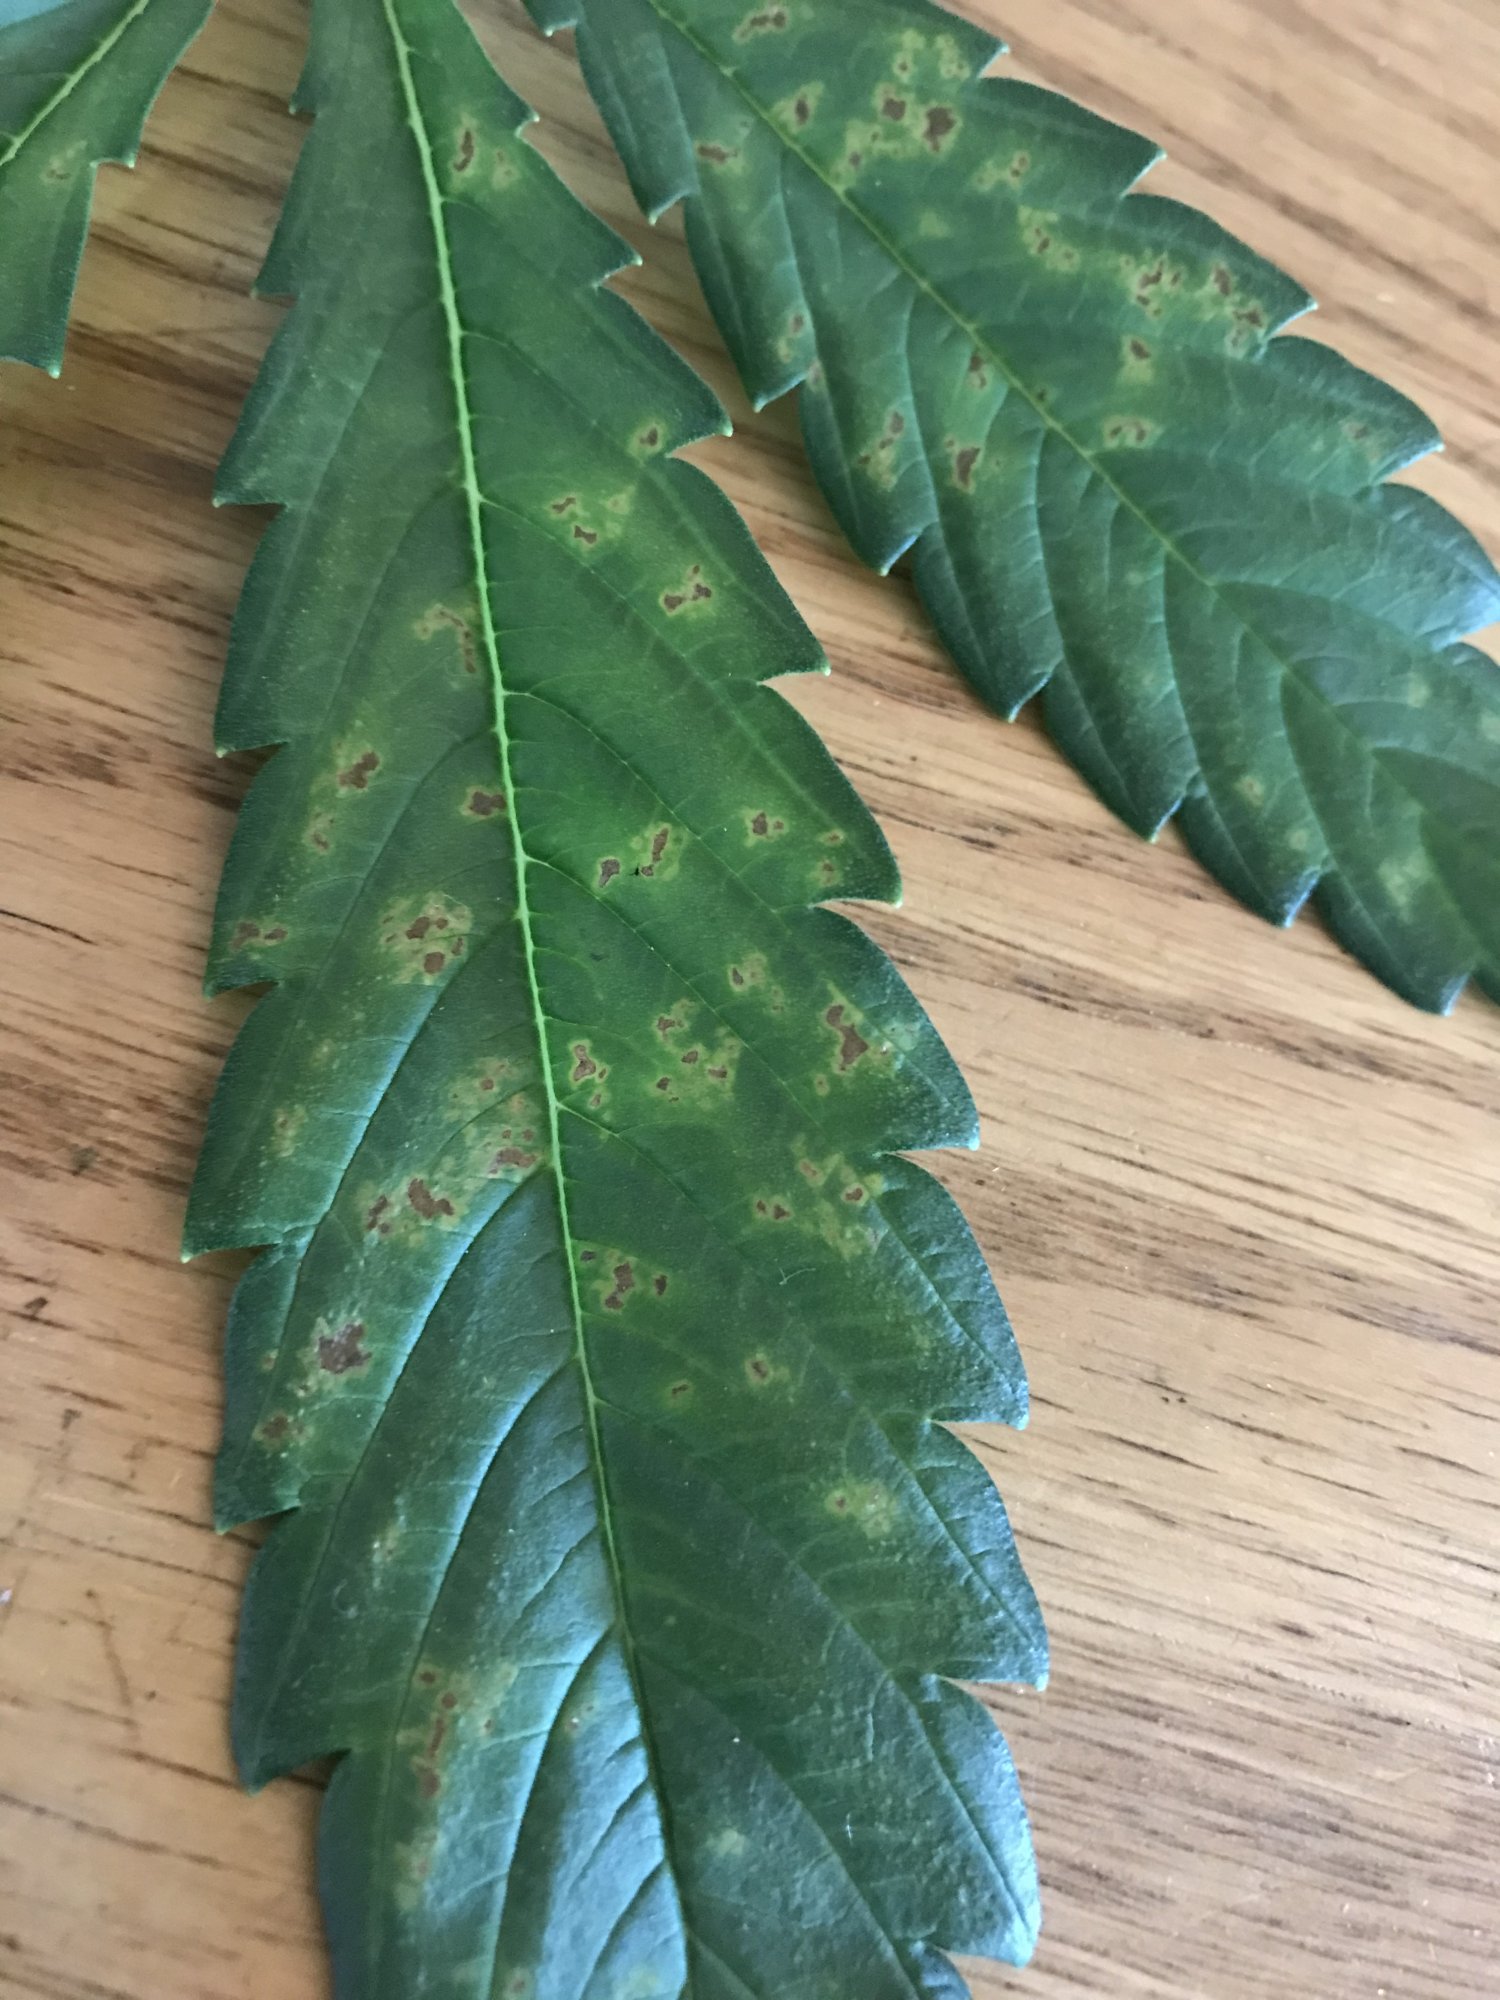 Leaf issue with one of my plants